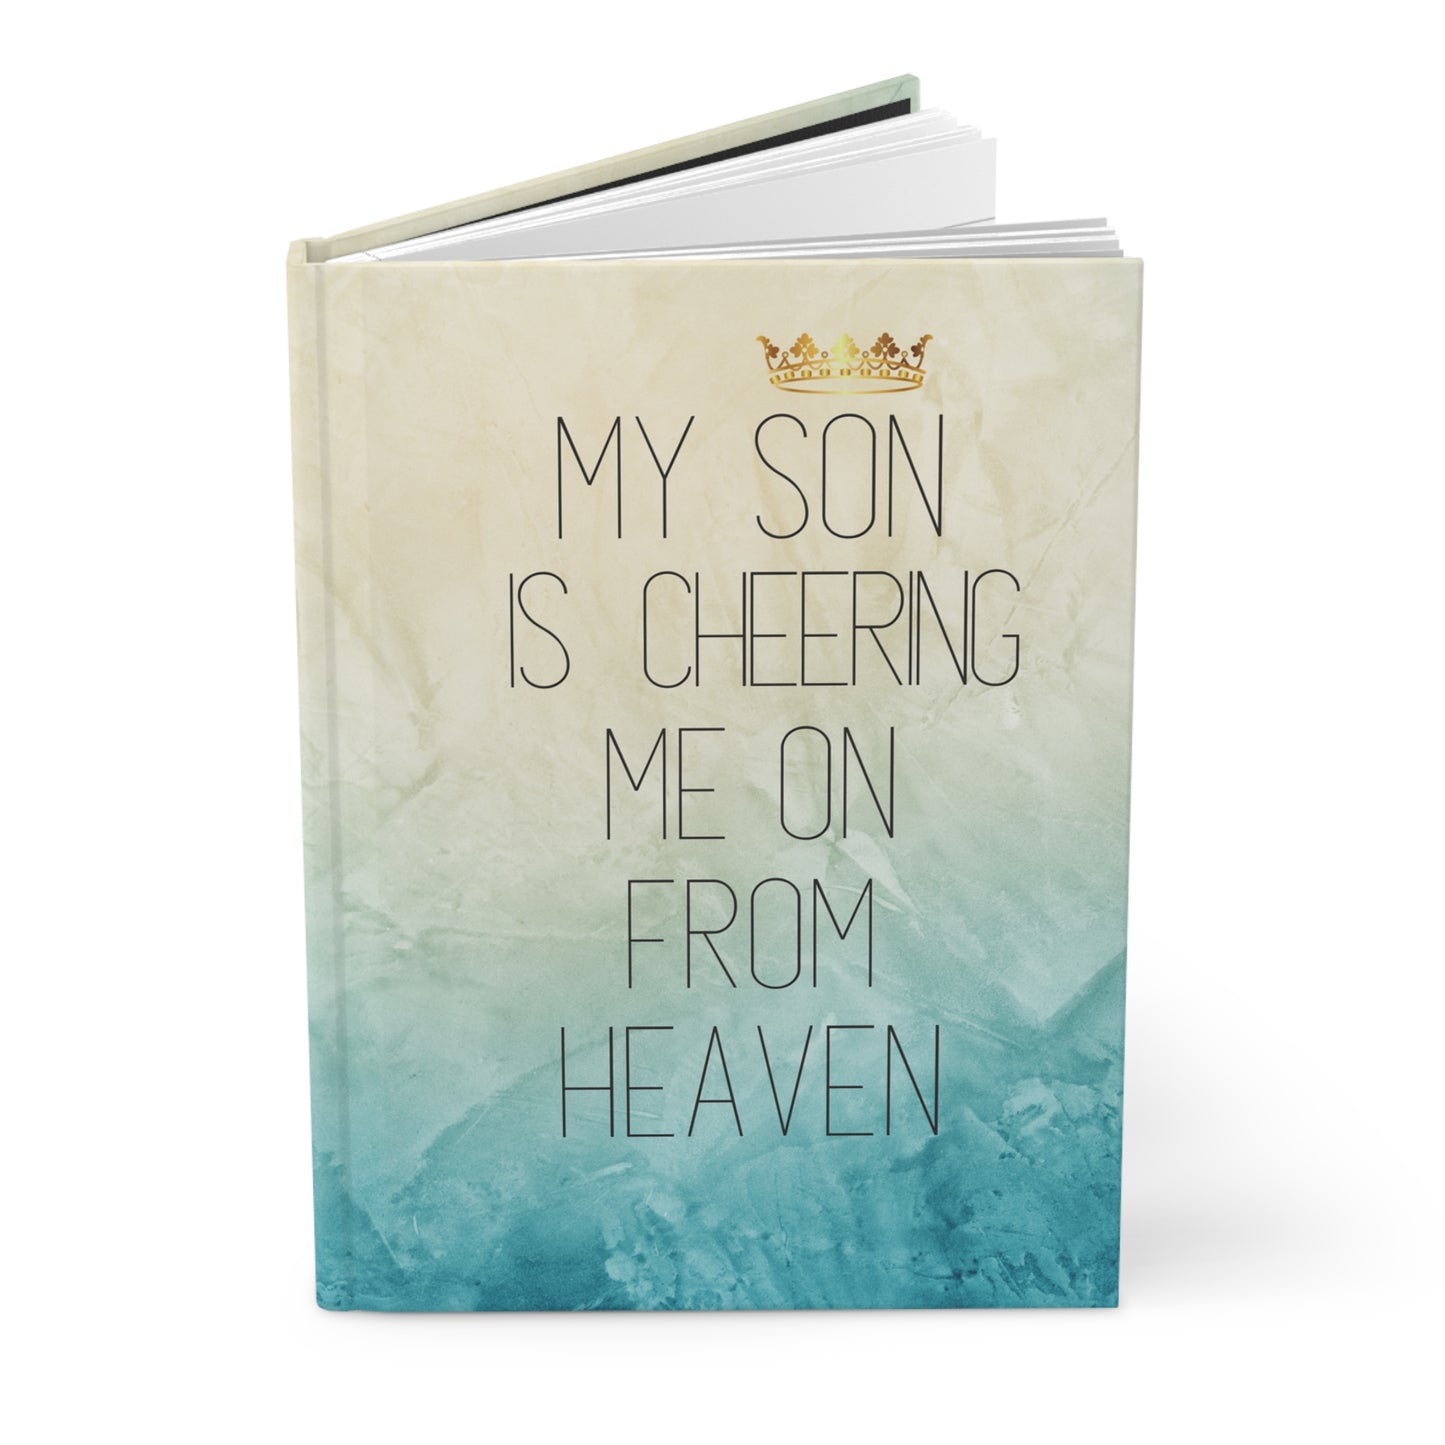 Grief Journal for Loss of Son, Cheering Me On From Heaven